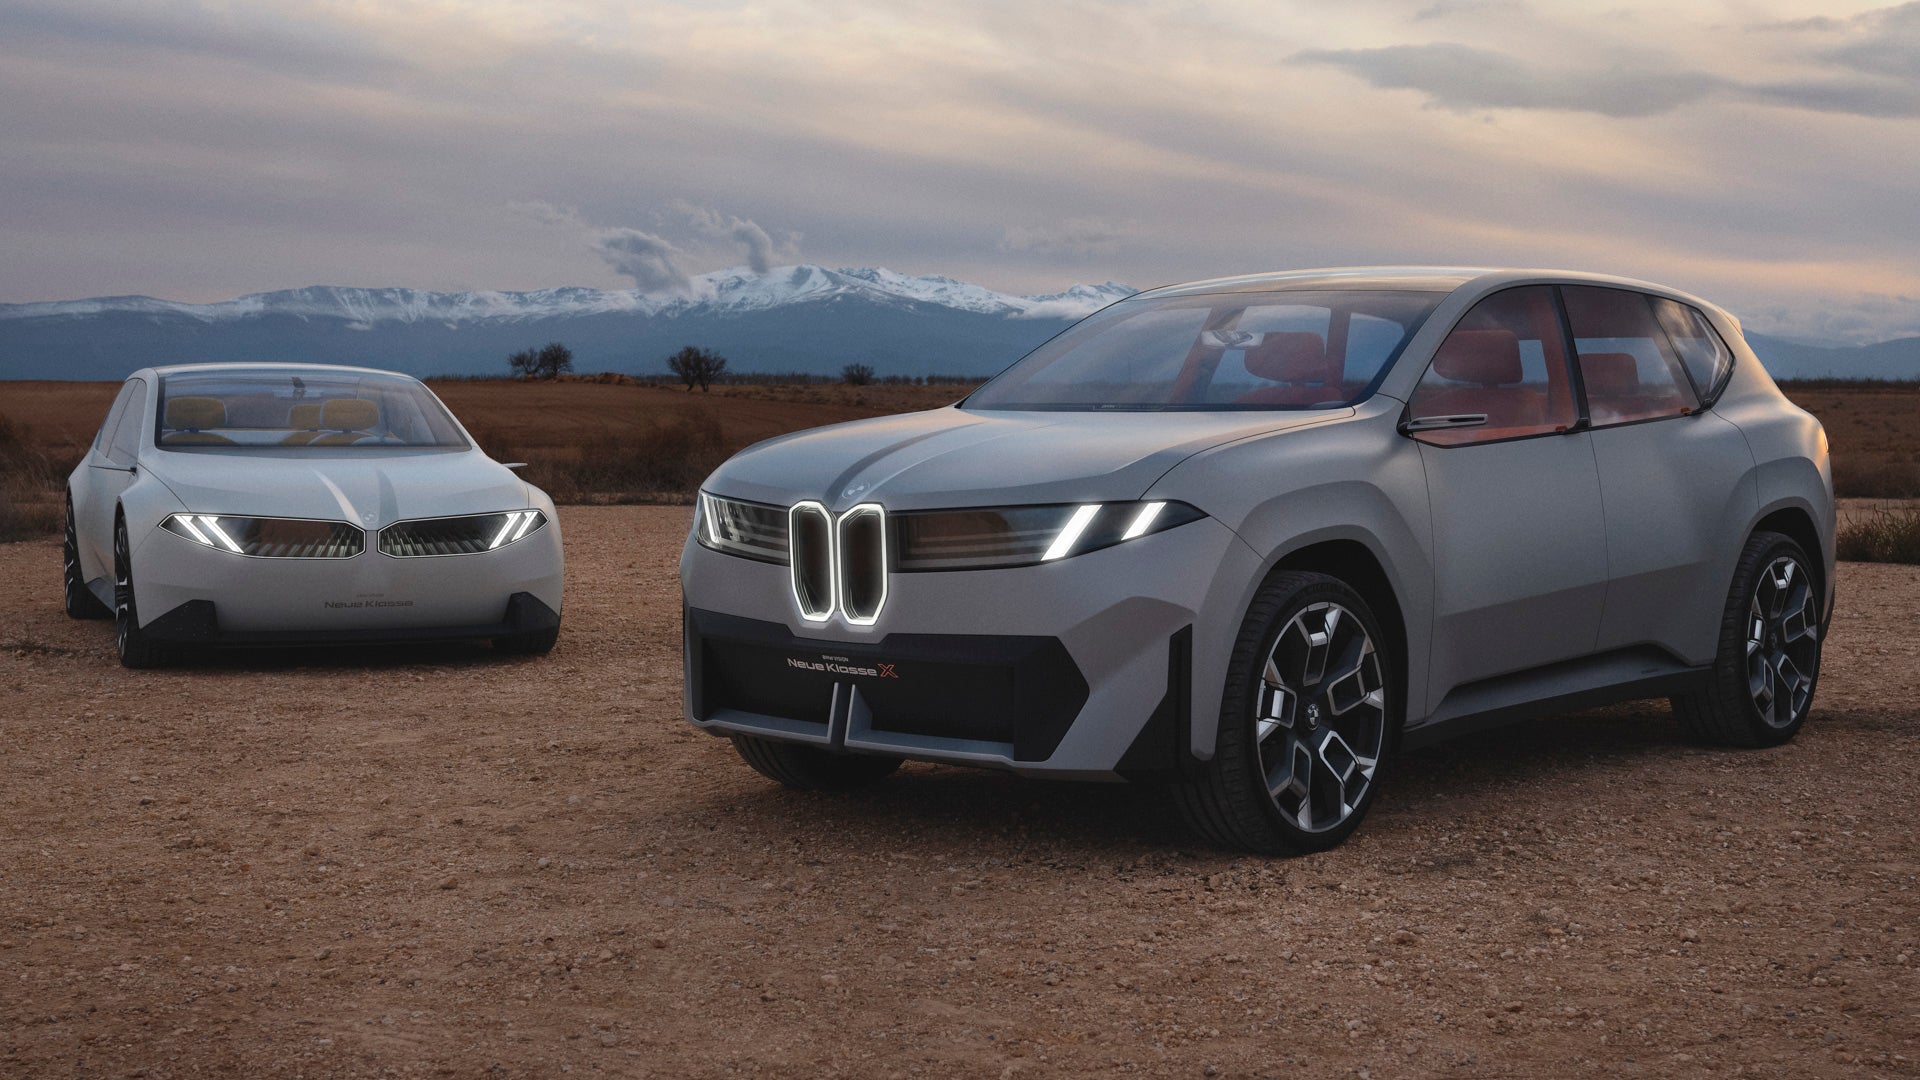 The BMW Vision Neue Klasse X Concept is transforming the brand’s electric SUV lineup